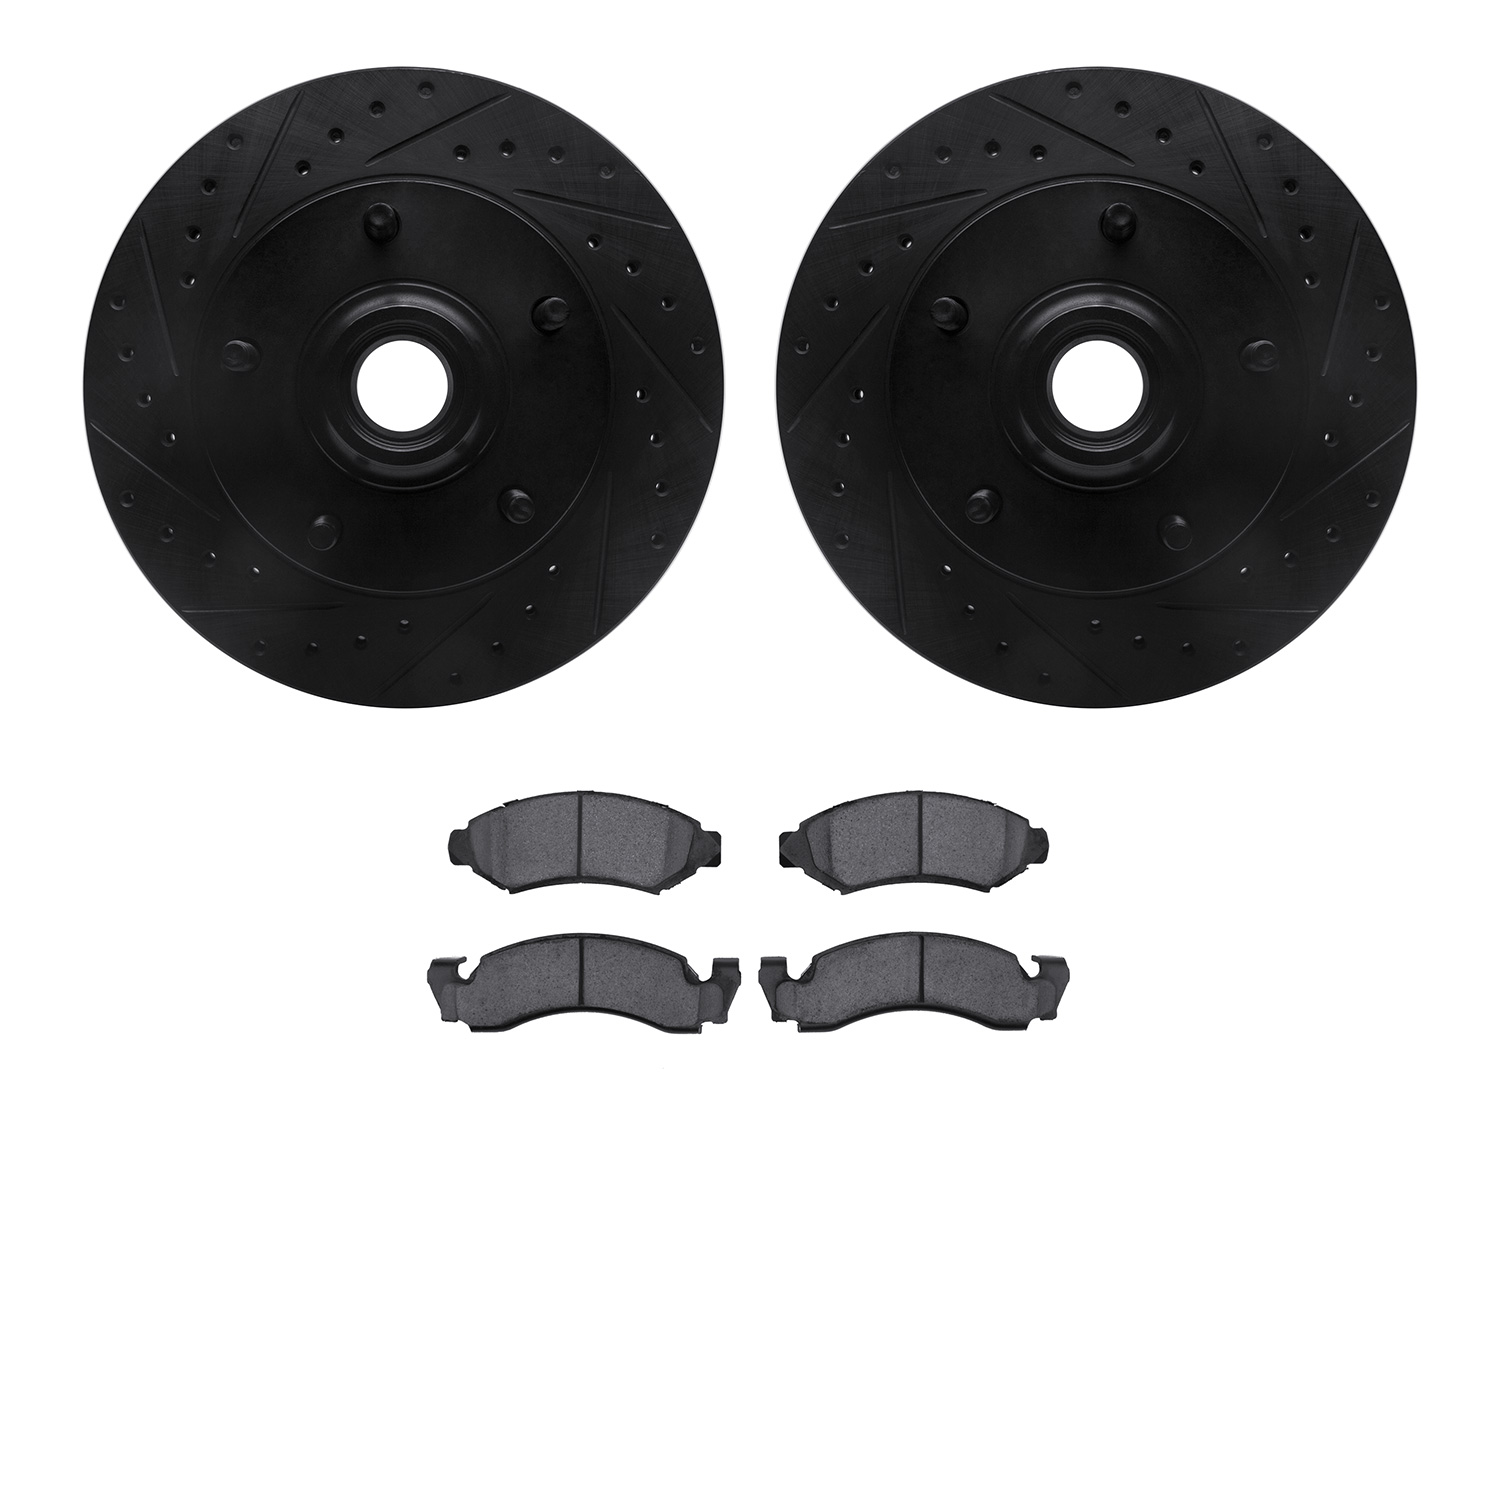 8402-54005 Drilled/Slotted Brake Rotors with Ultimate-Duty Brake Pads Kit [Black], 1973-1985 Ford/Lincoln/Mercury/Mazda, Positio